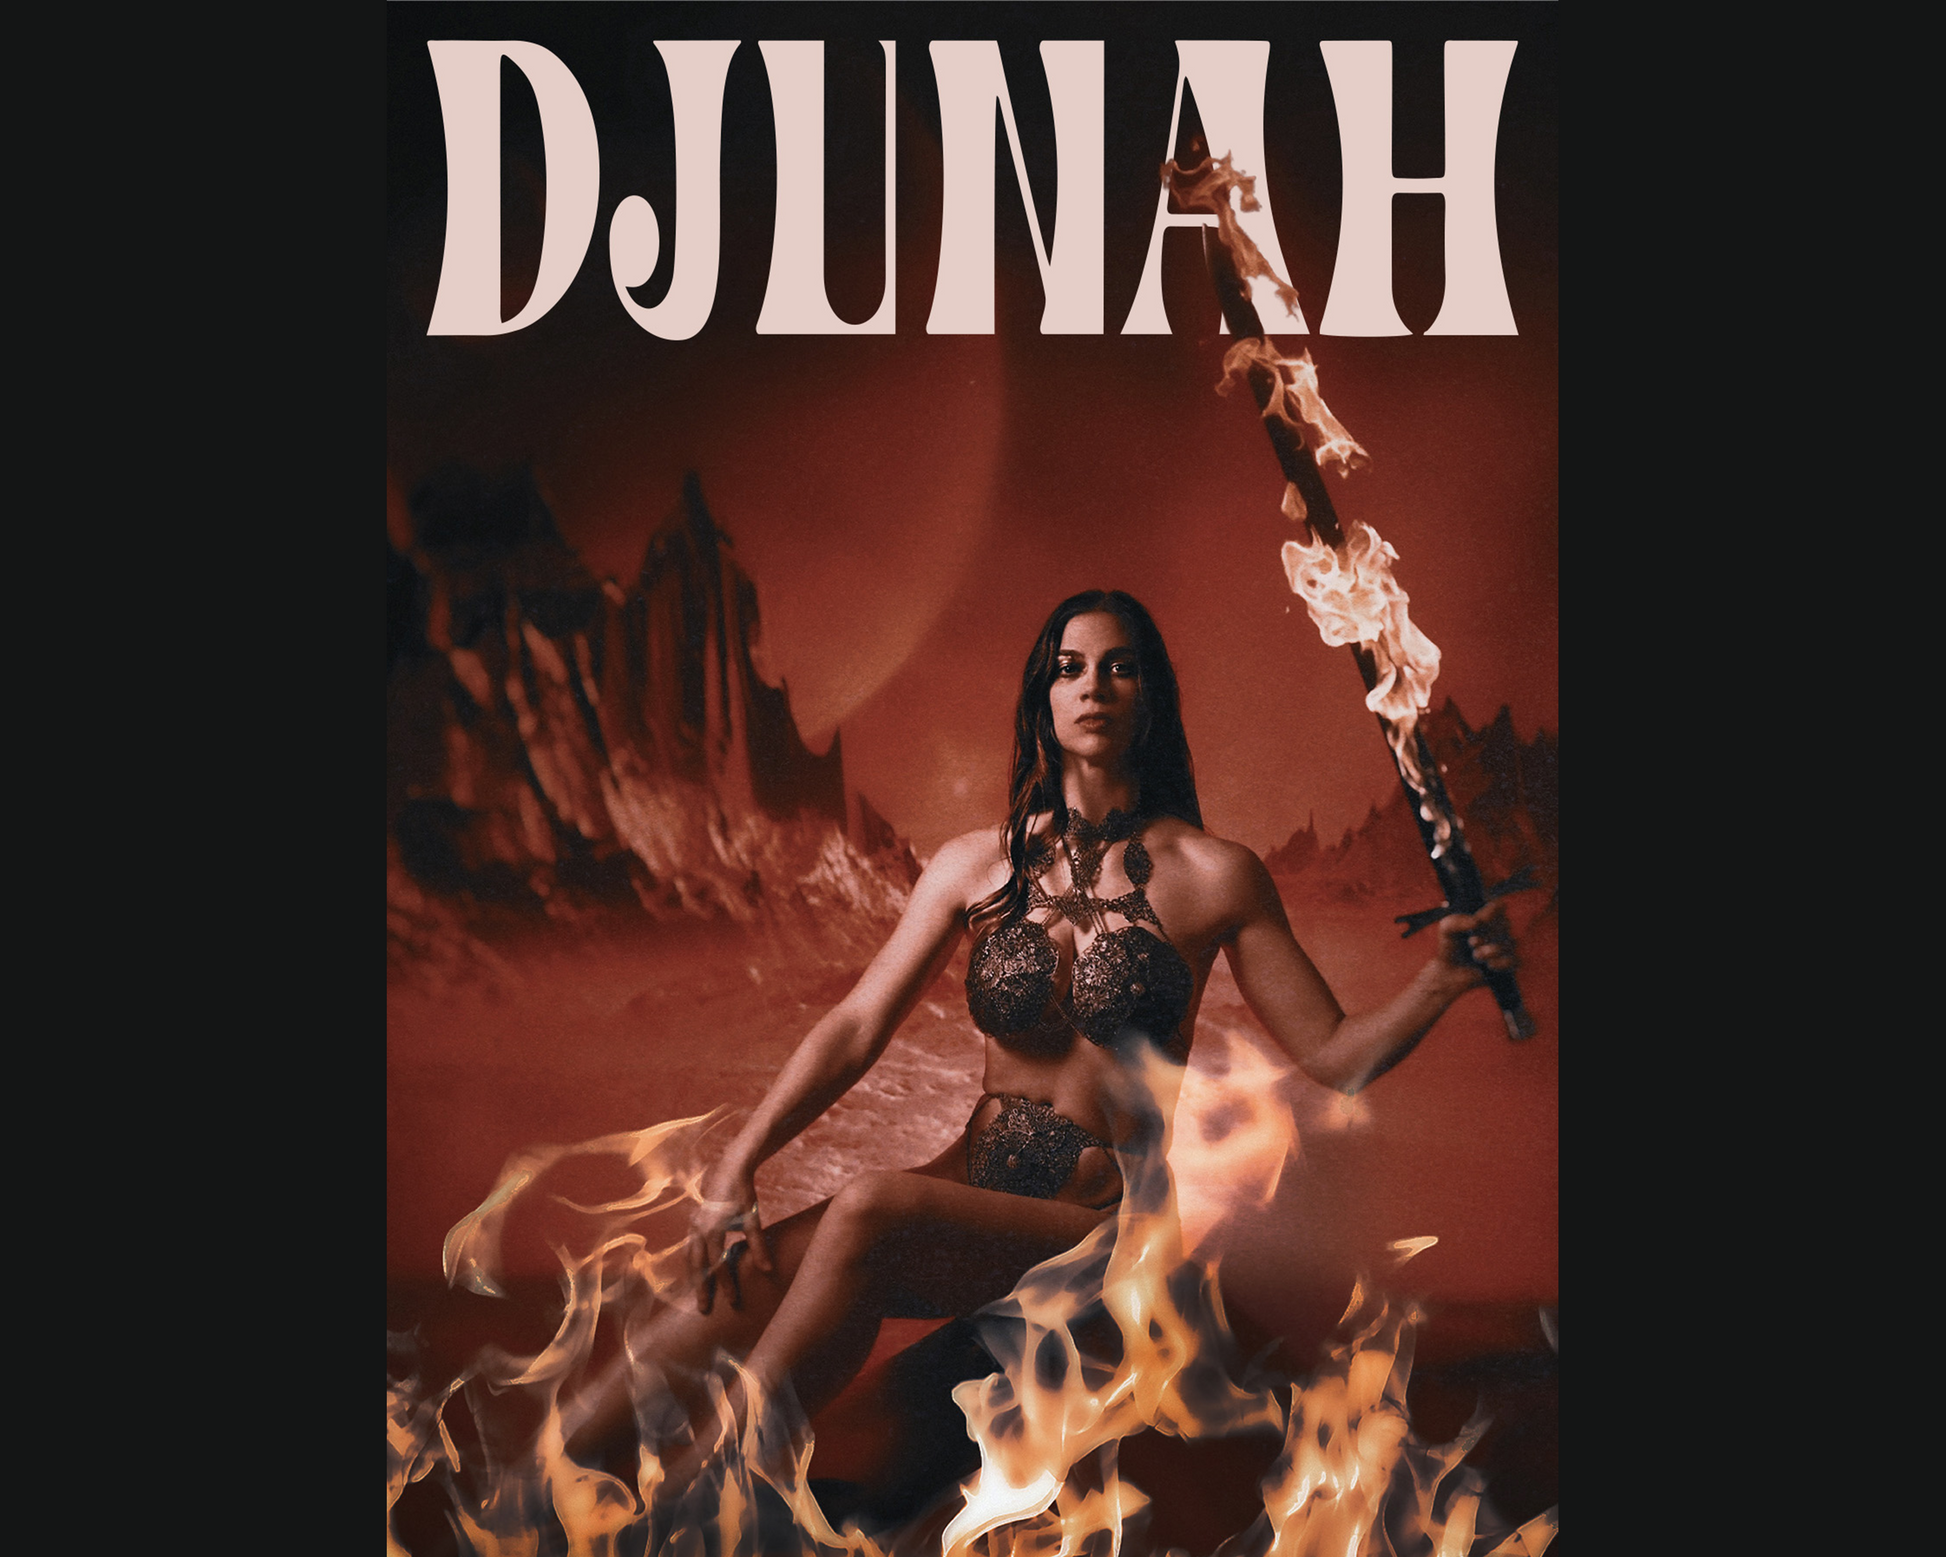 Djunah flaming sword 18x24 poster printed on dark gray Bella Canvas 100% cotton, photo by LightWitch / Courtney Brooke Hall